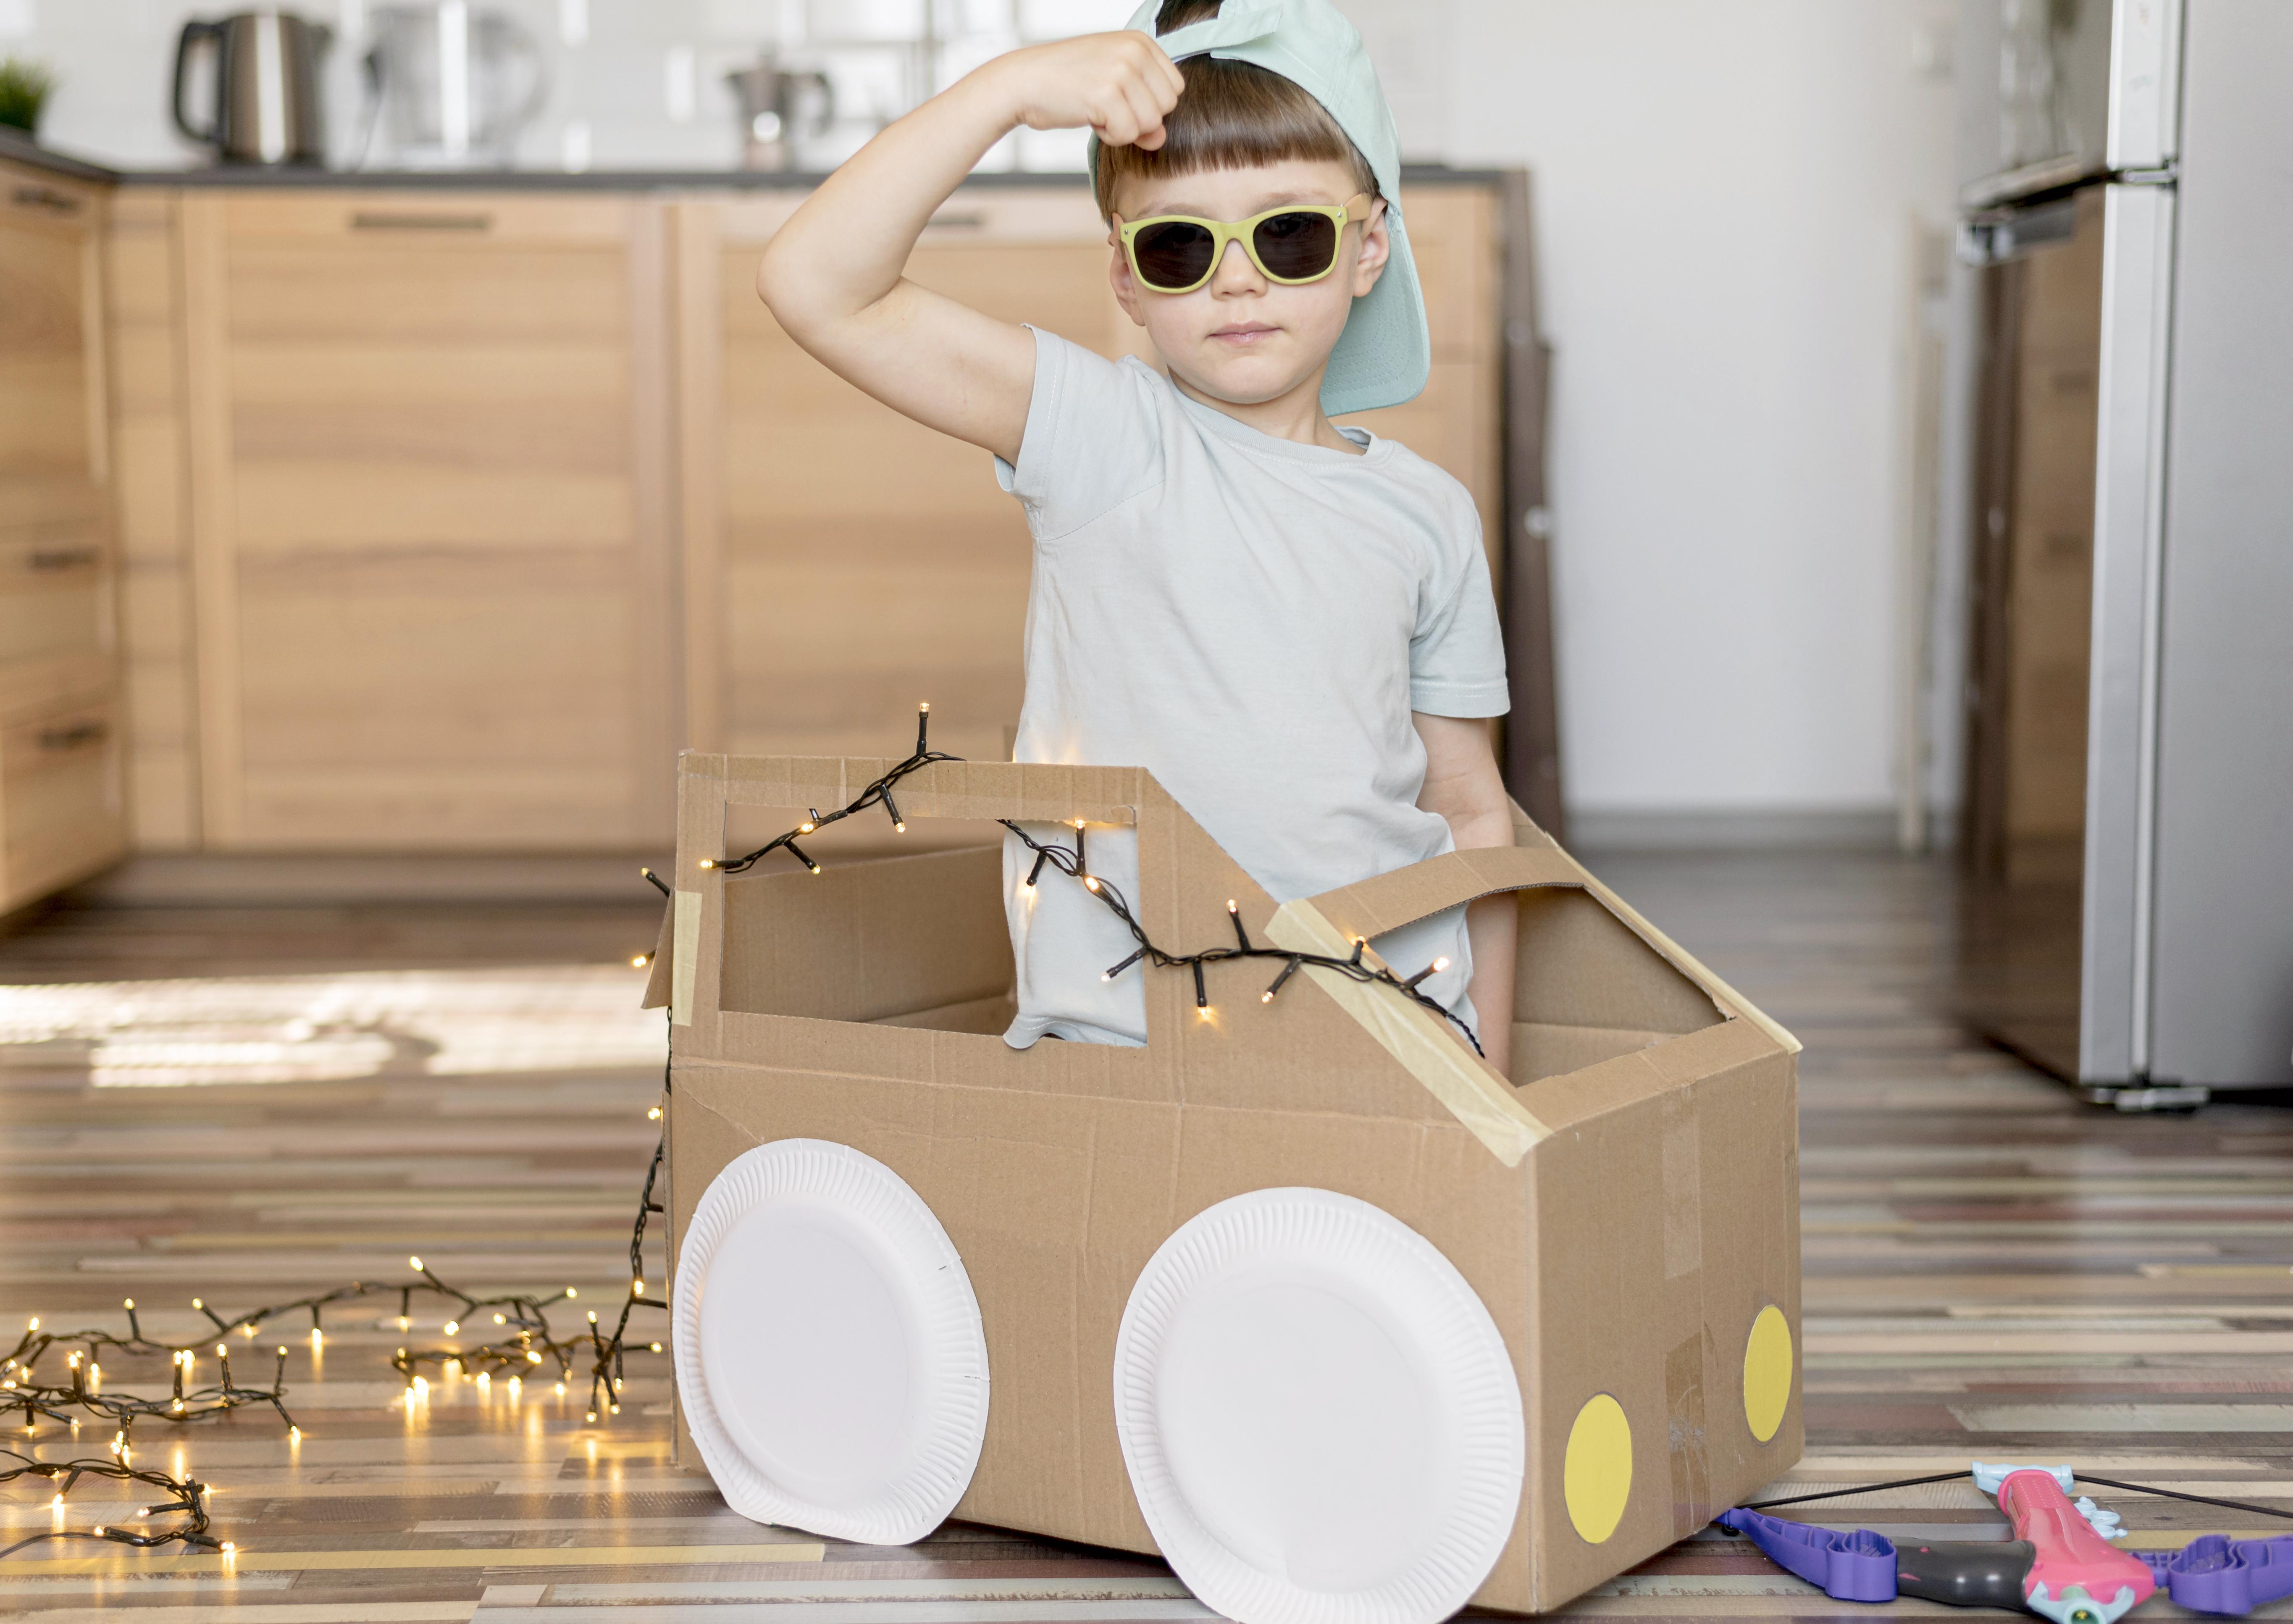 A young boy, looking cool, sitting inside a cardboard box car. The cardboard box car and cabinets behind it are brown. The boy is wearing a gray shirt, green framed sunglasses, and a pale blue hat. There are white Christmas lights coming out of the cardboard box car and trailing on the ground.